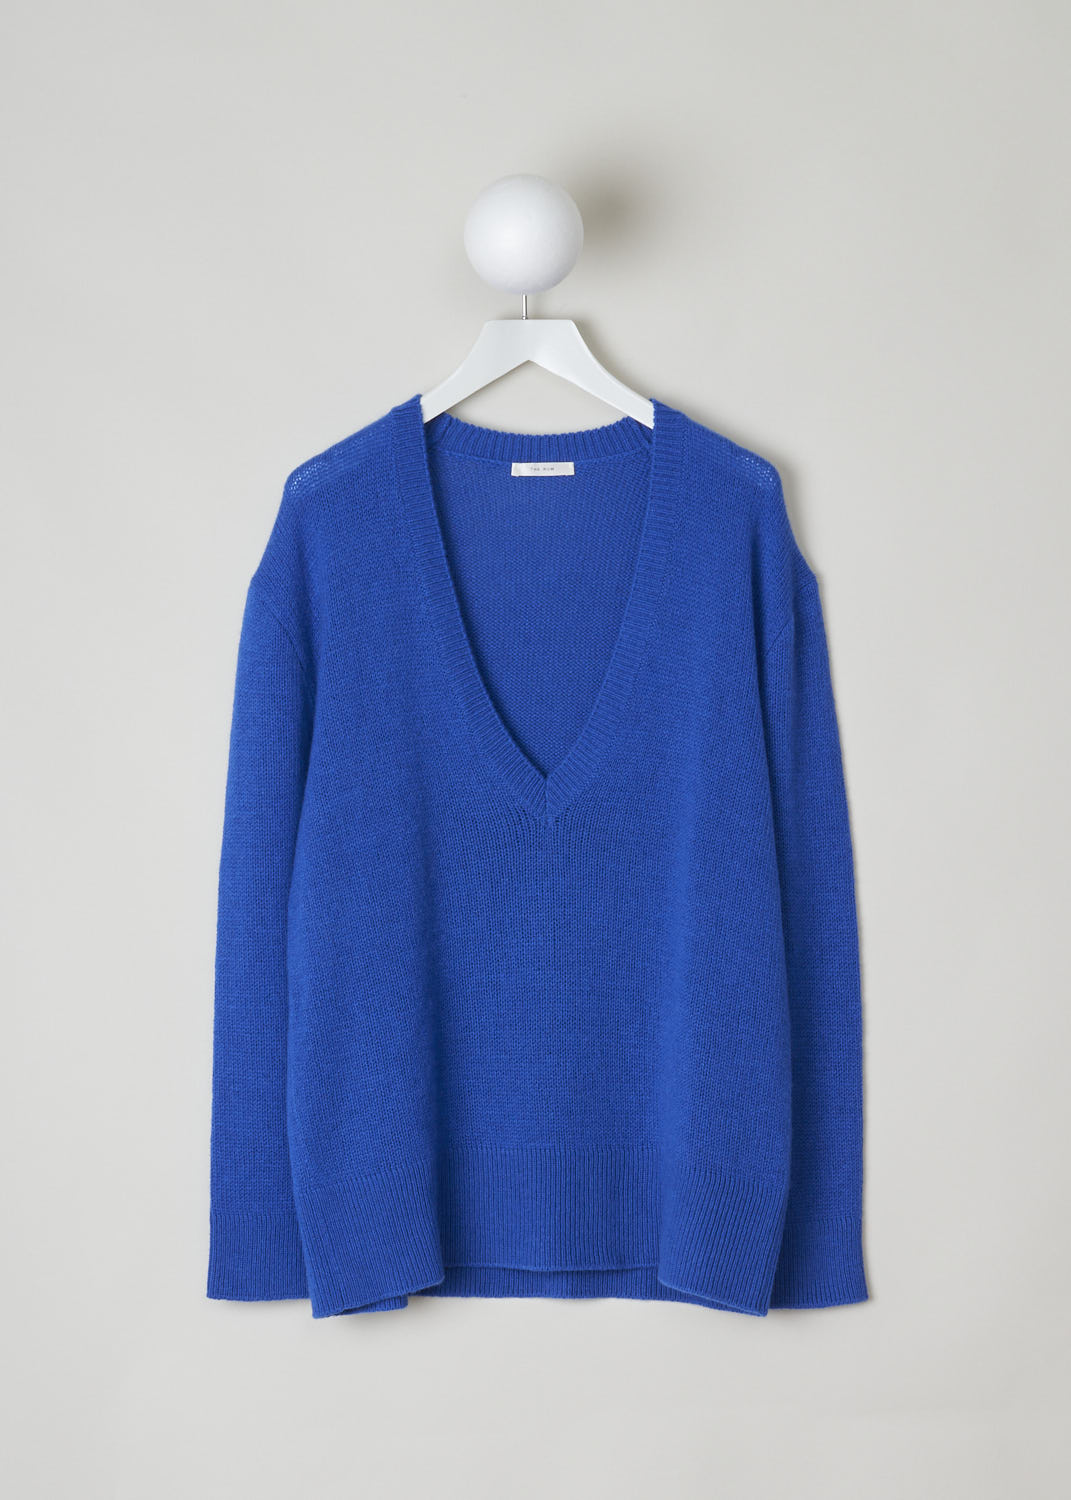 THE ROW, BLUE CASHMERE V-NECKLINE SWEATER, BAUDELIA_TOP_5508YI_87_KLEIN_BLUE, Blue, Front, This blue V-neck sweater is made from a soft blue cashmere. The cuffs, hem and neckline have a ribbed finish. 
